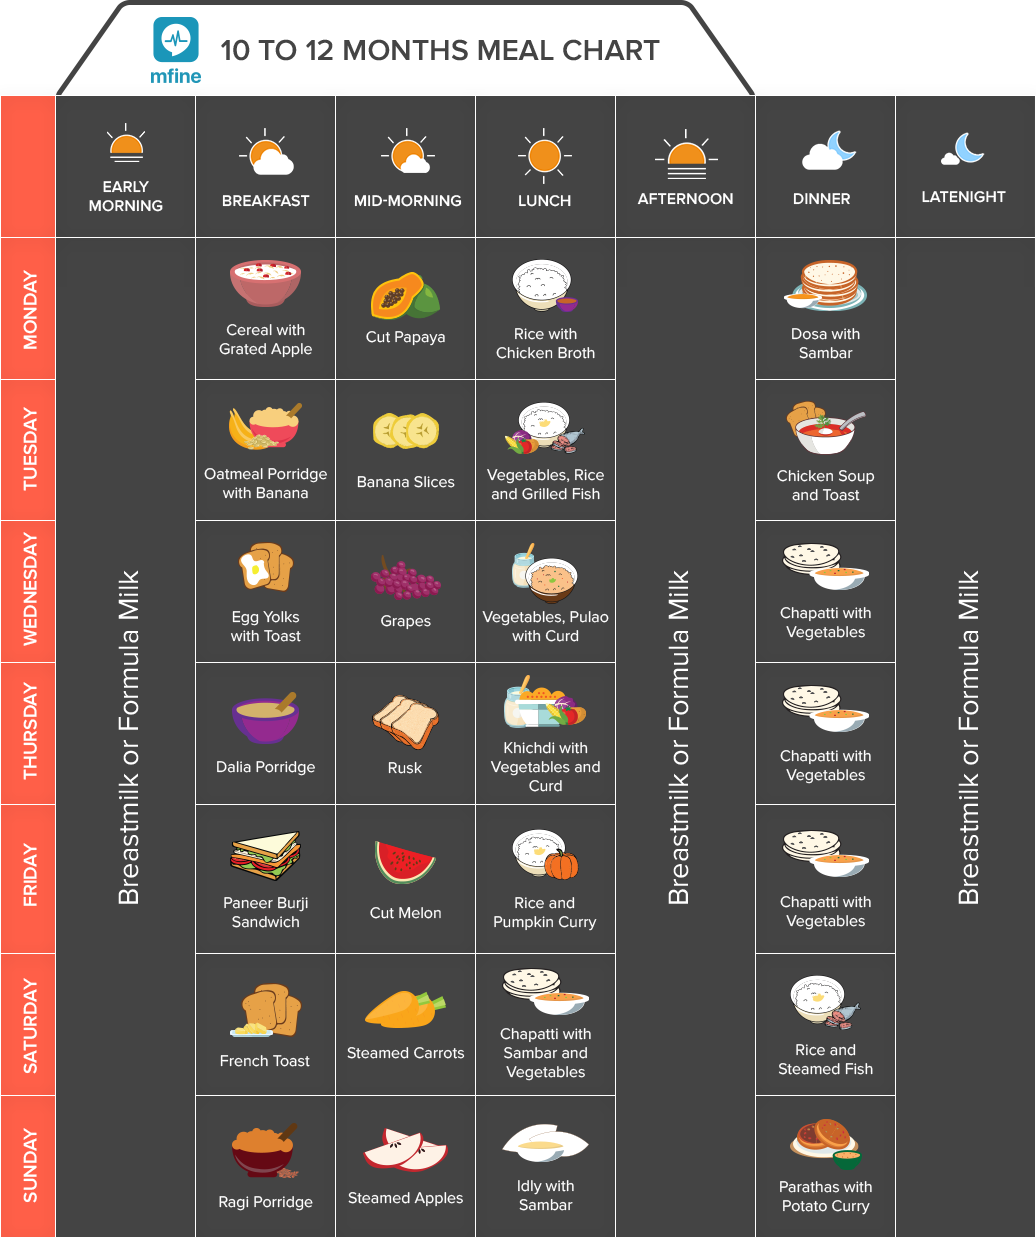 6 Month Baby Food Chart In